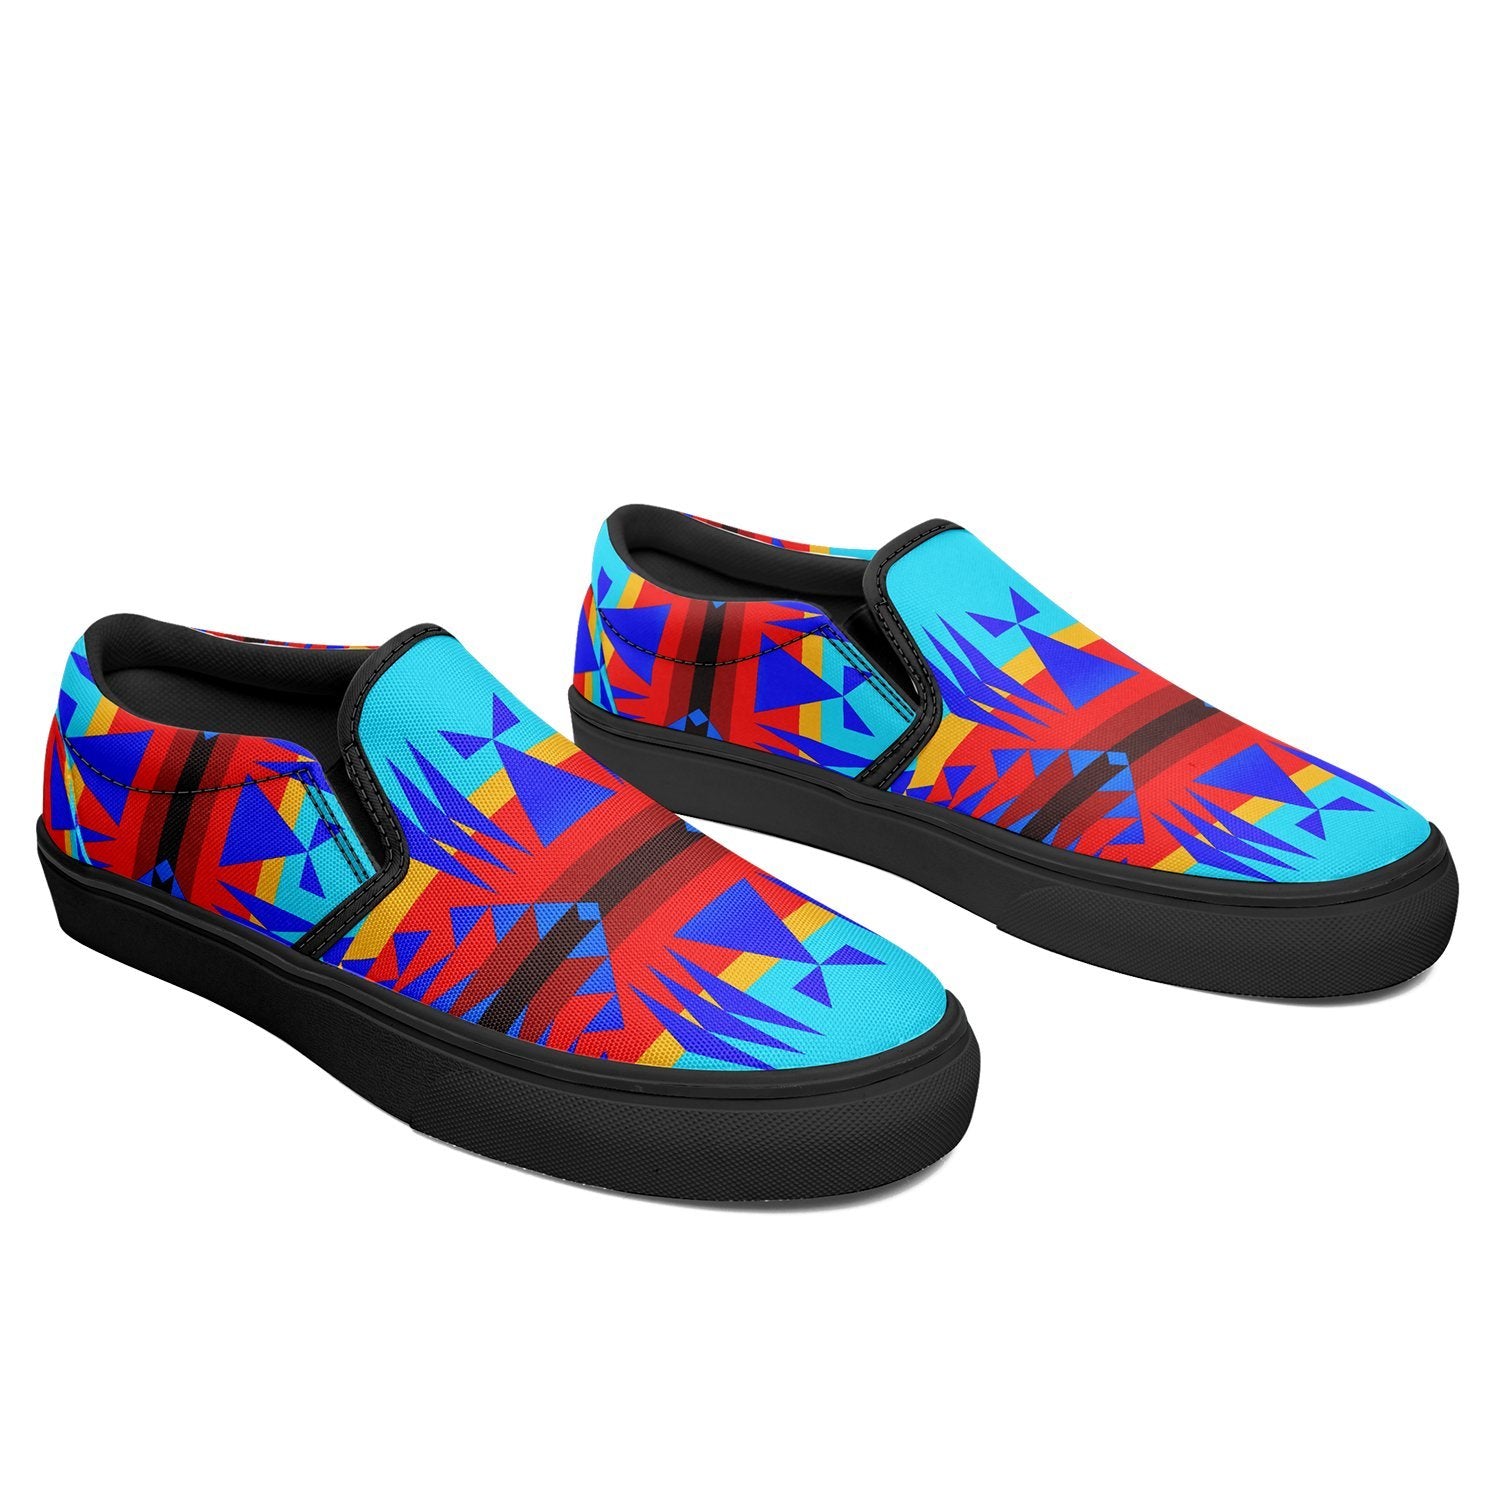 Between the Mountains Blue Otoyimm Canvas Slip On Shoes 49 Dzine 